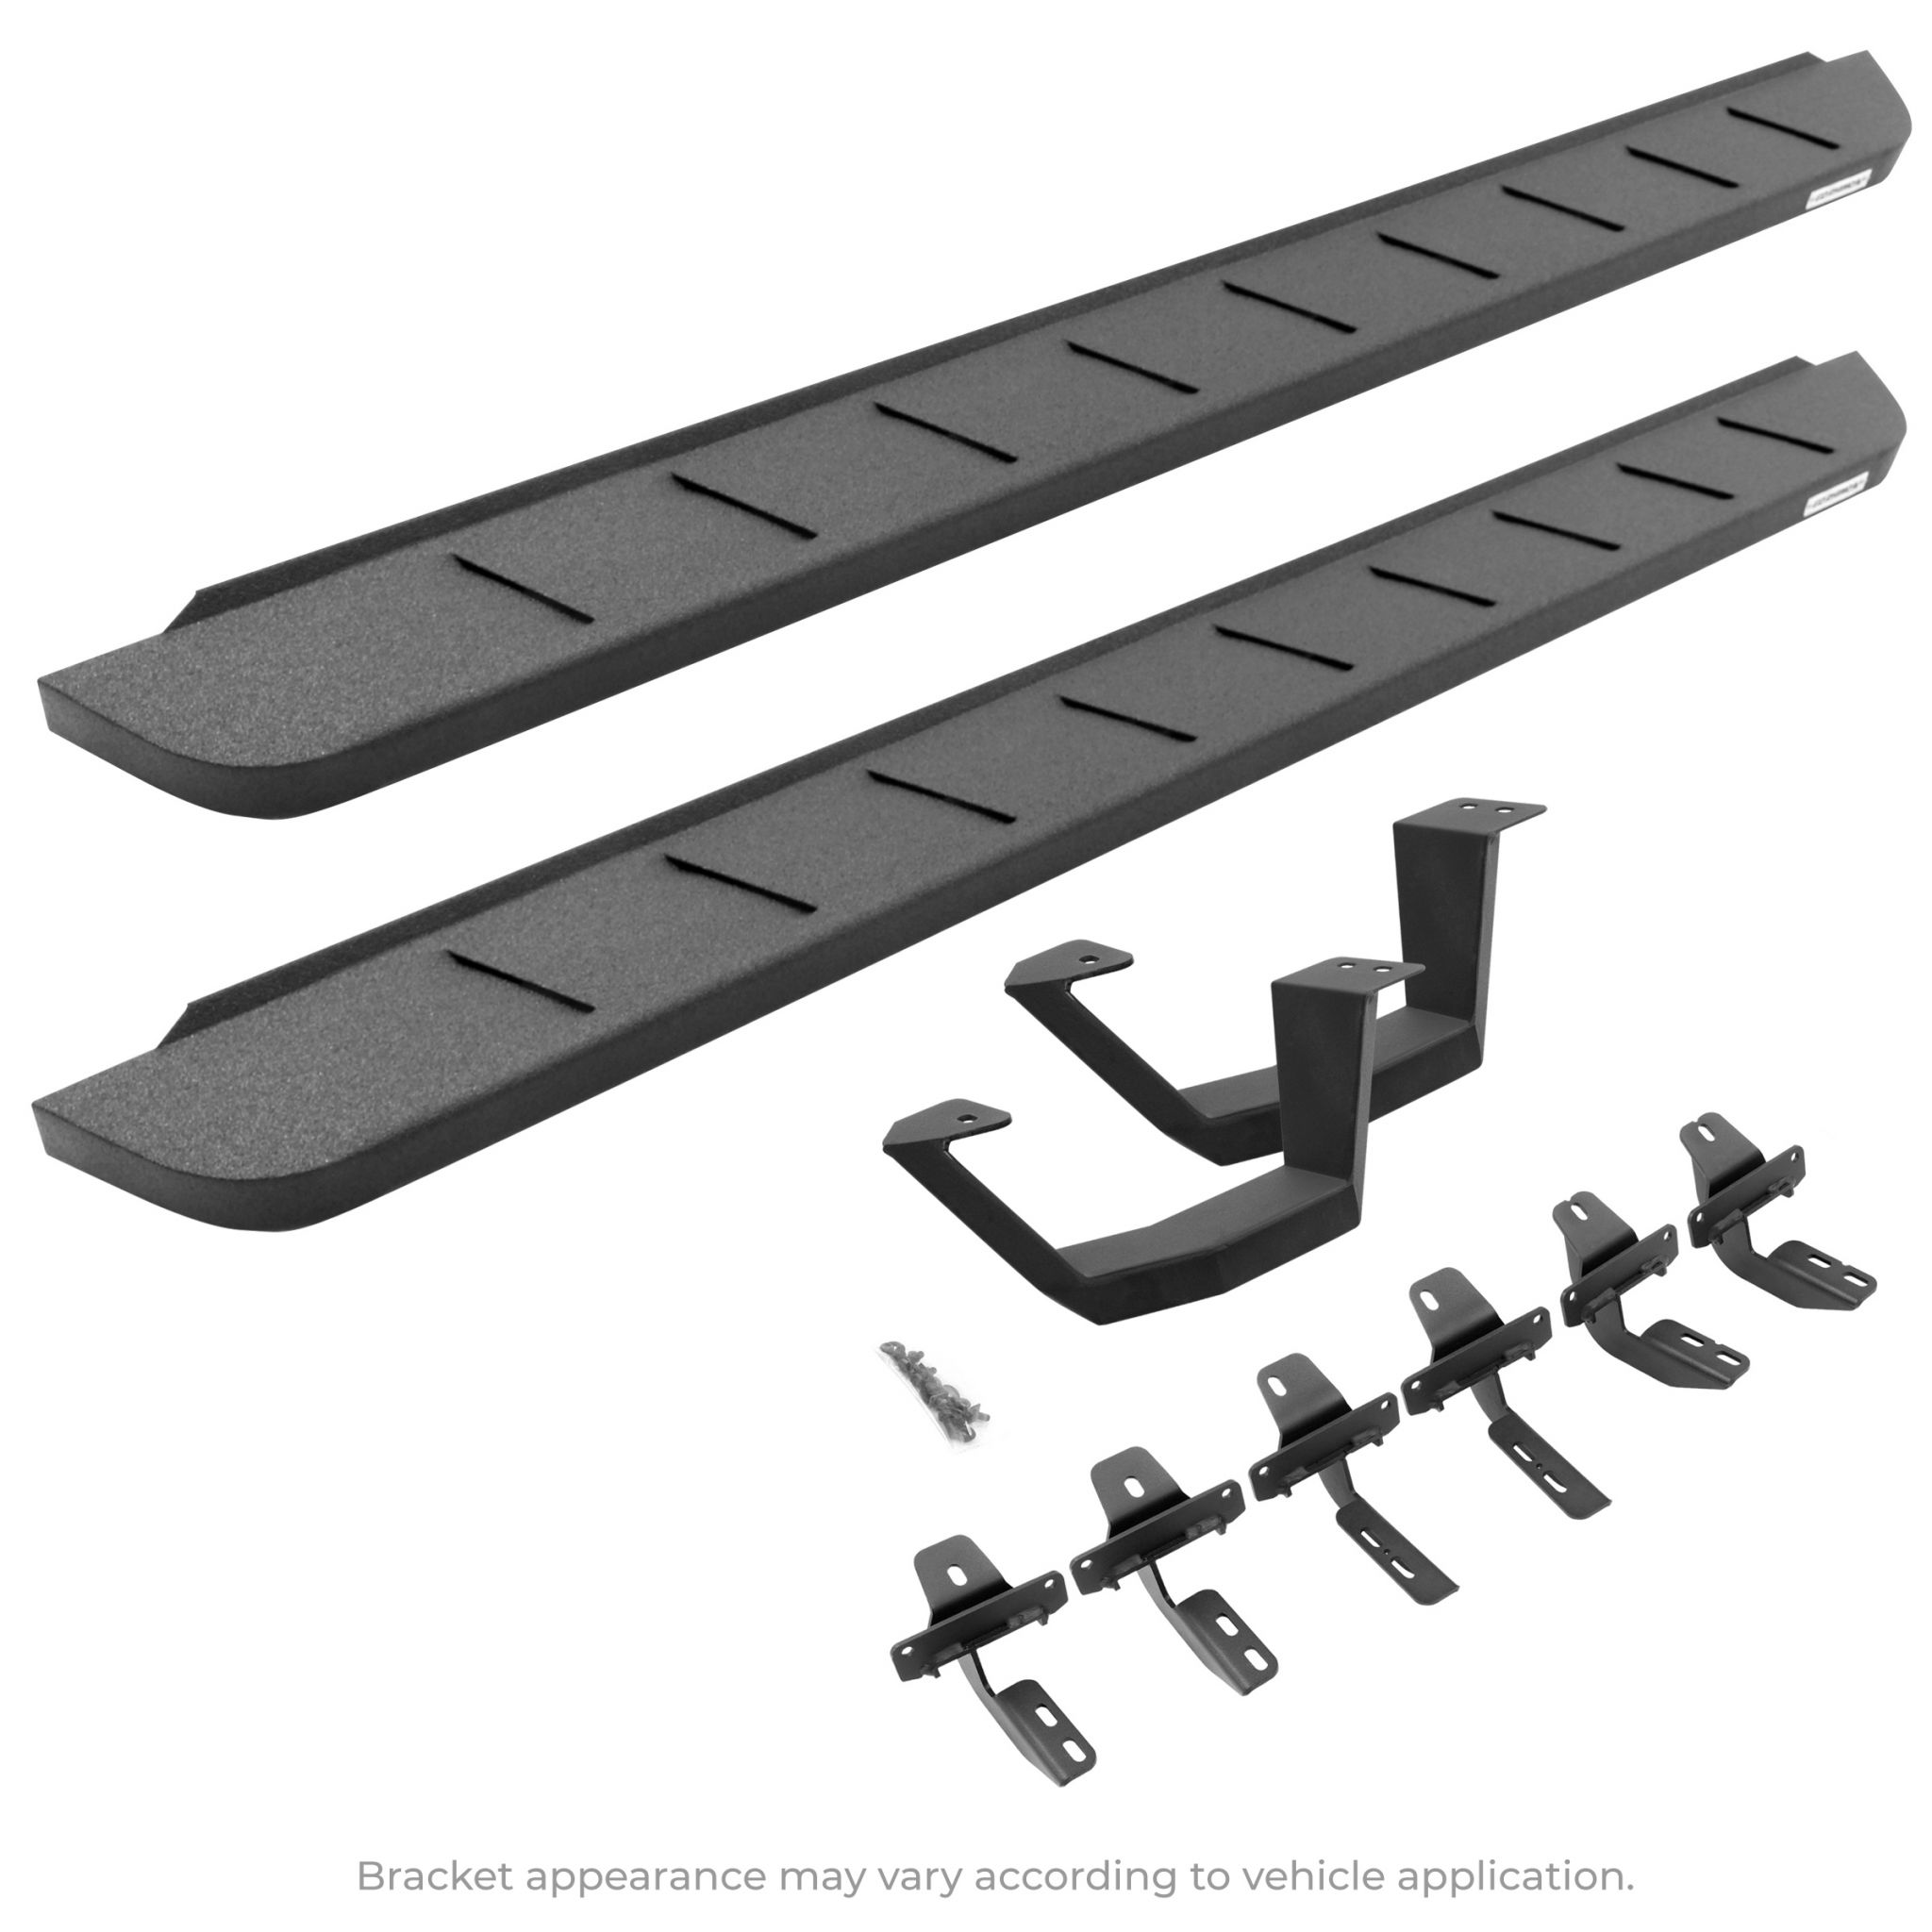 Go Rhino 6349274810T - RB10 Running Boards With Mounting Brackets & 1 Pair of Drop Steps Kit - Protective Bedliner Coating